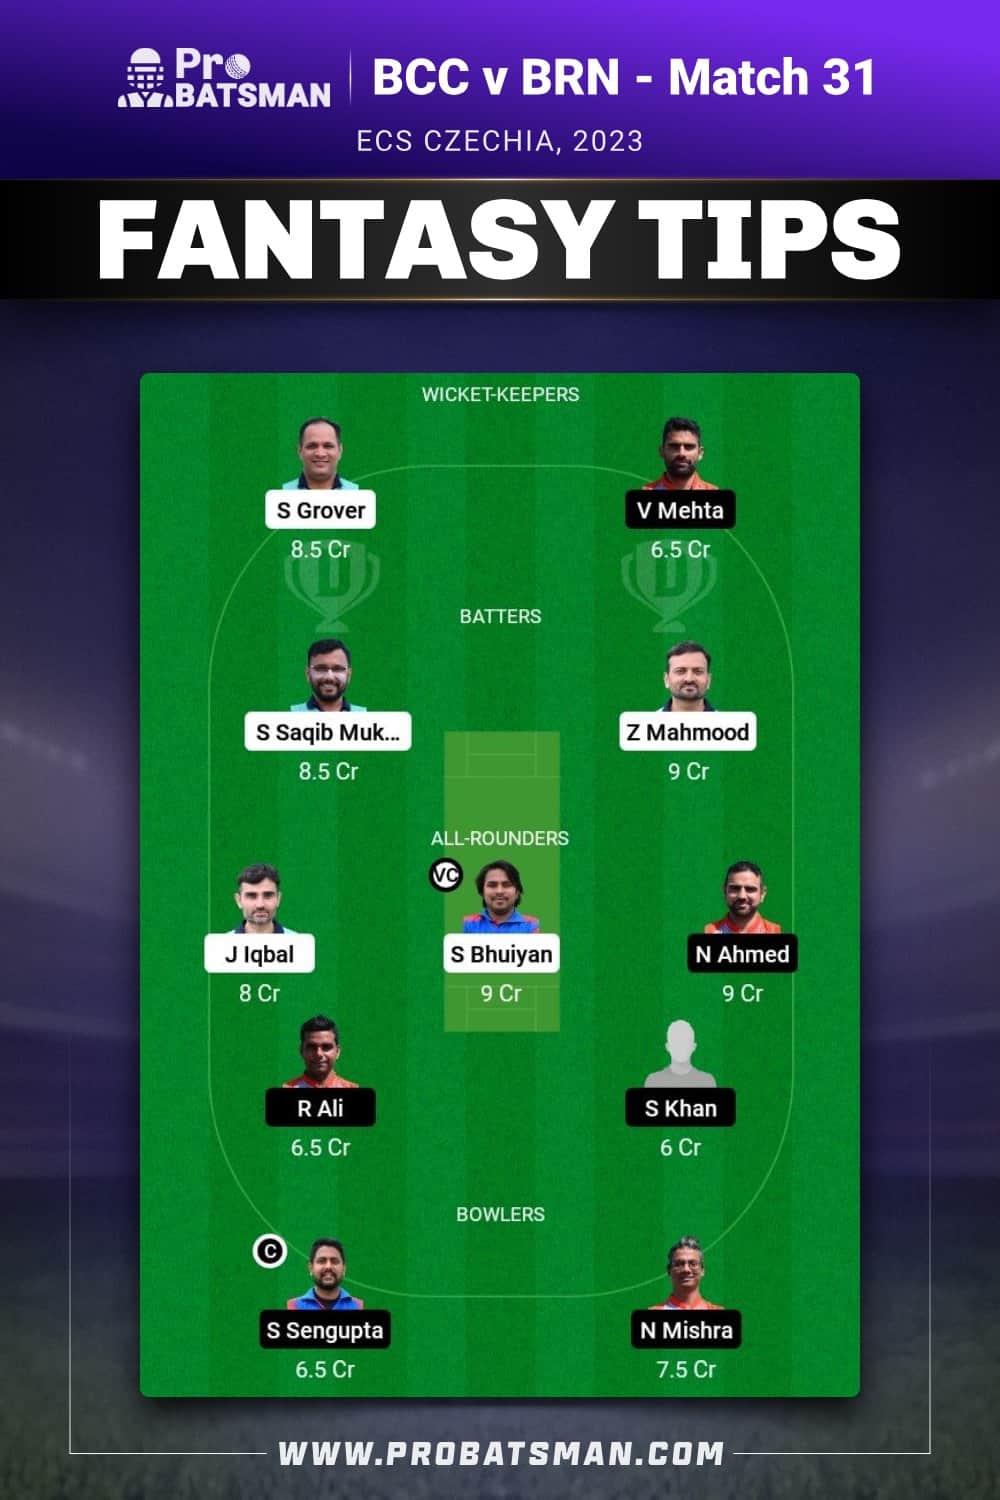 BCC vs BRN Dream11 Prediction With Stats, Pitch Report & Player Record of ECS Czechia, 2023 For Match 31